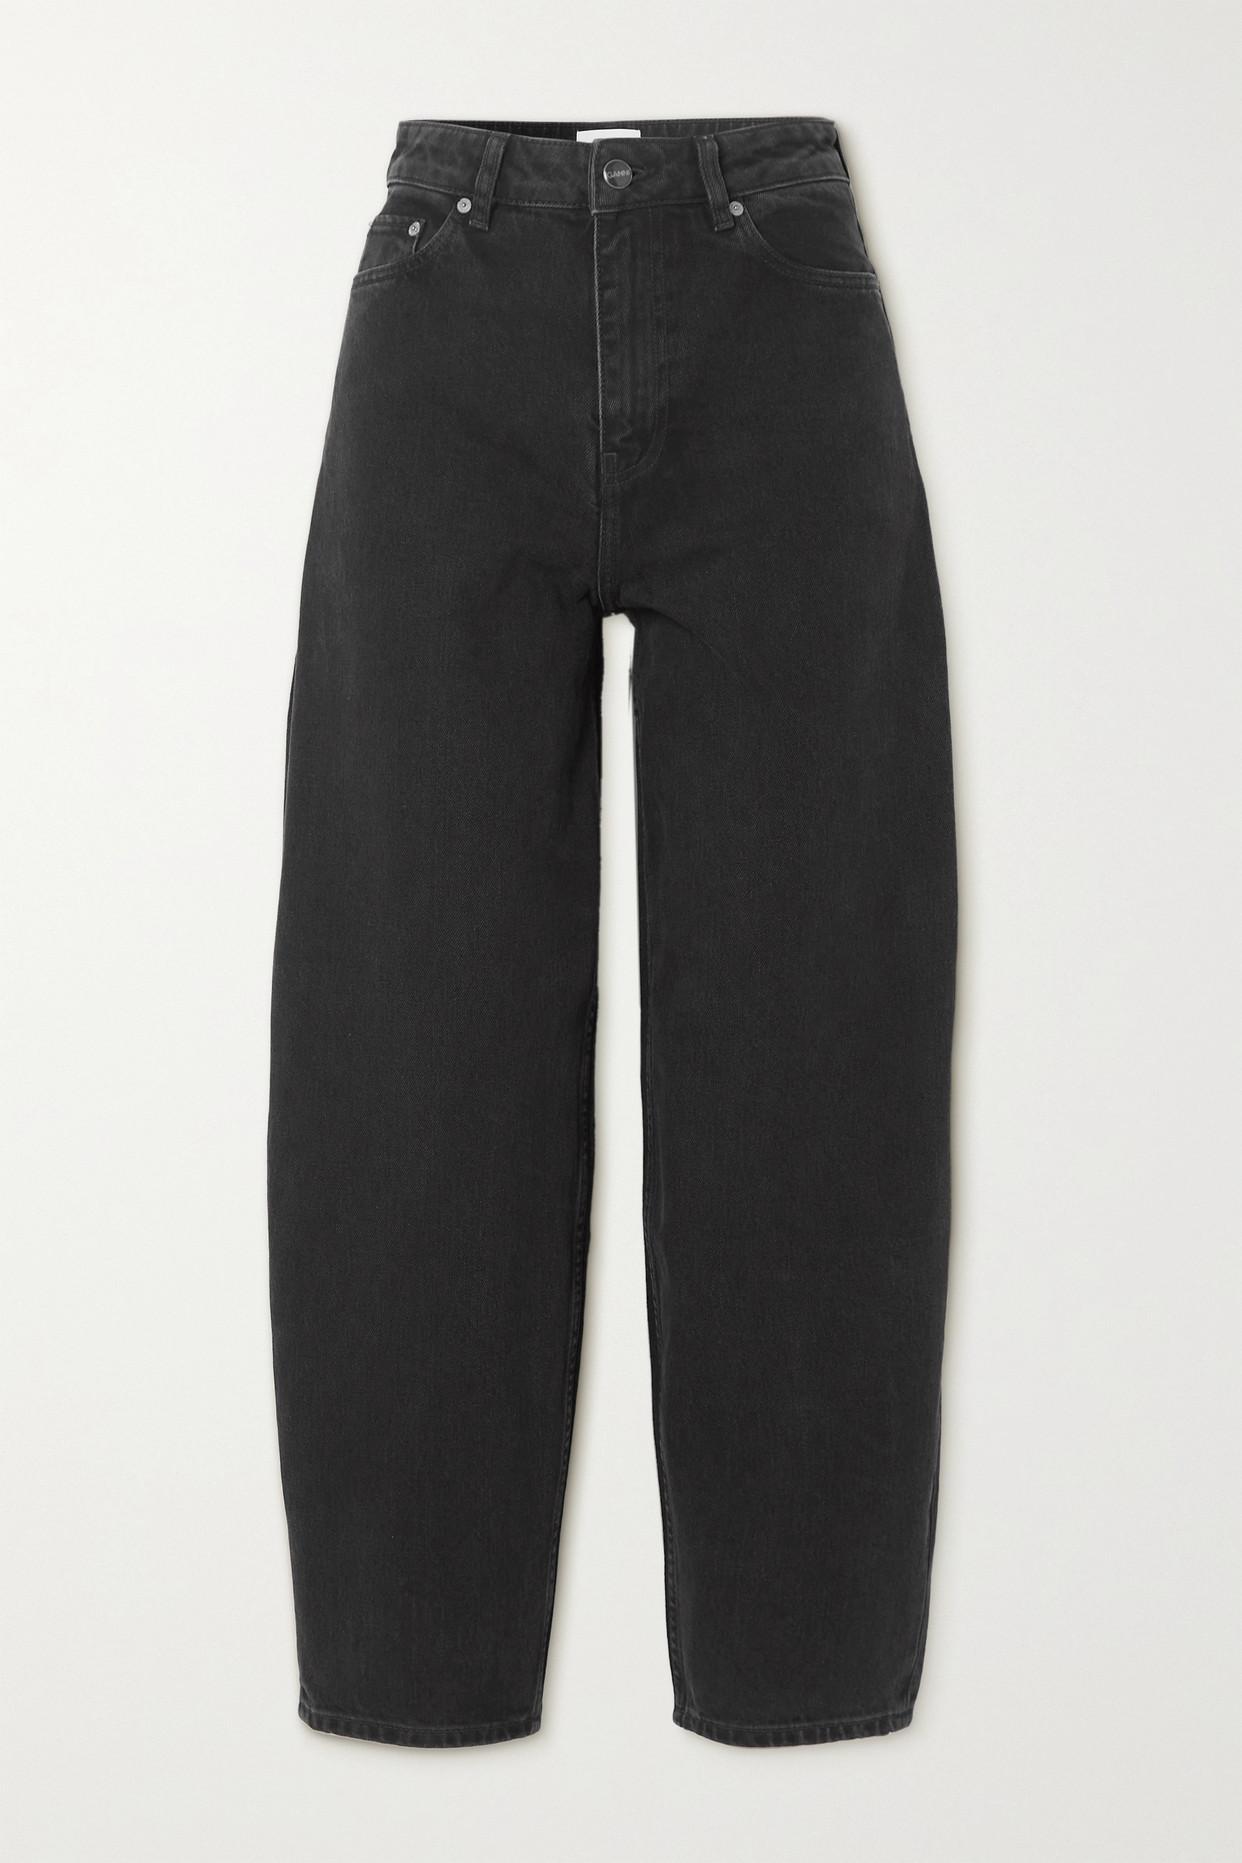 Ganni Stary Cropped High-rise Tapered Jeans in Black | Lyst